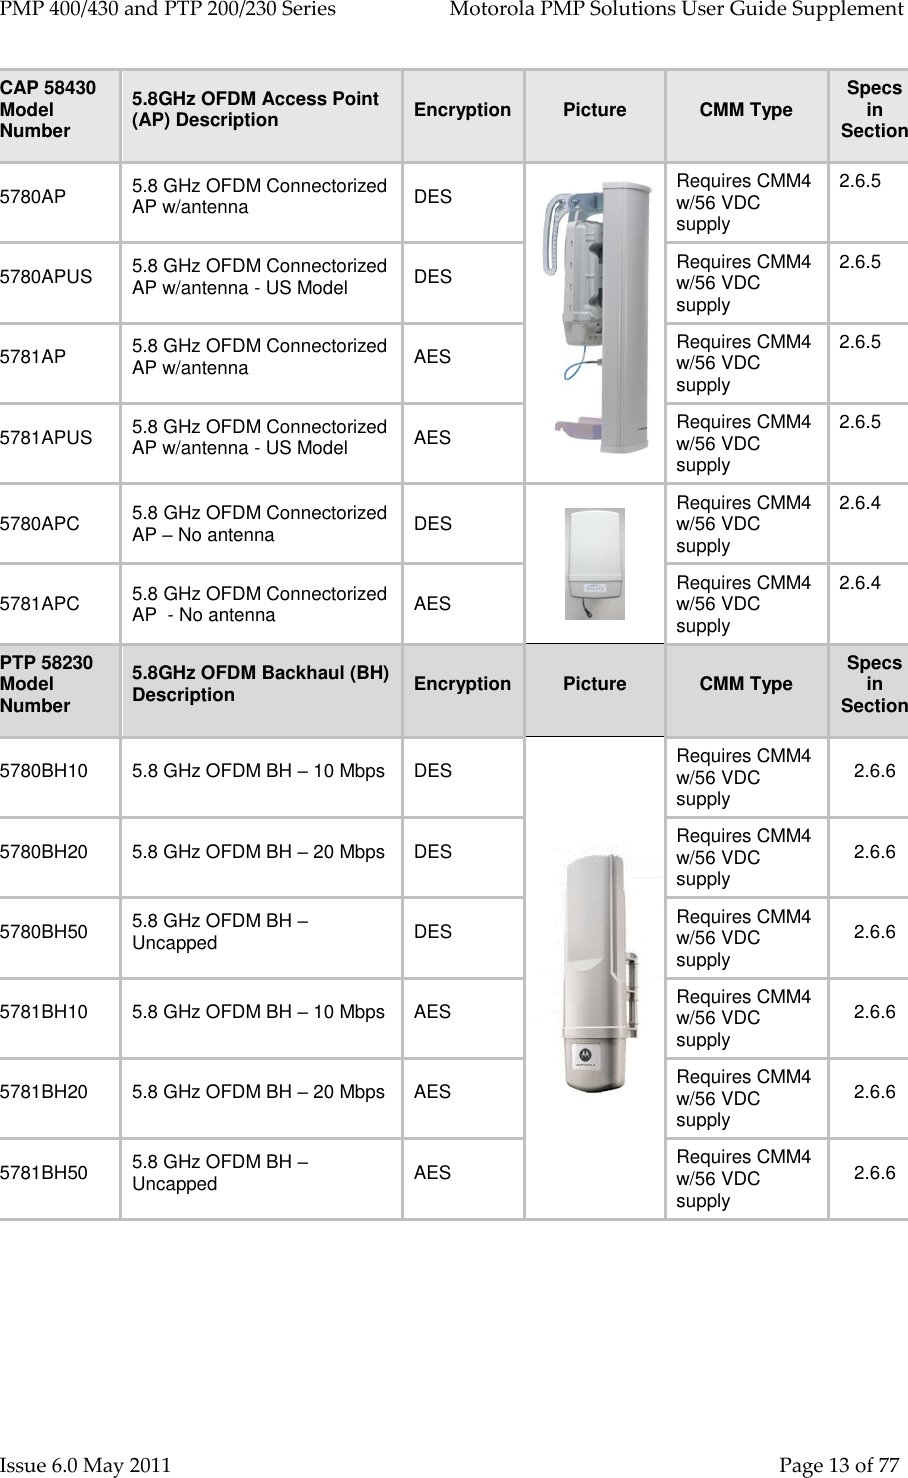 PMP 400/430 and PTP 200/230 Series   Motorola PMP Solutions User Guide Supplement Issue 6.0 May 2011    Page 13 of 77 CAP 58430 Model Number 5.8GHz OFDM Access Point (AP) Description Encryption Picture CMM Type Specs in Section 5780AP 5.8 GHz OFDM Connectorized AP w/antenna DES  Requires CMM4 w/56 VDC supply 2.6.5 5780APUS 5.8 GHz OFDM Connectorized AP w/antenna - US Model DES Requires CMM4 w/56 VDC supply 2.6.5 5781AP 5.8 GHz OFDM Connectorized AP w/antenna AES Requires CMM4 w/56 VDC supply 2.6.5 5781APUS 5.8 GHz OFDM Connectorized AP w/antenna - US Model AES Requires CMM4 w/56 VDC supply 2.6.5 5780APC 5.8 GHz OFDM Connectorized AP – No antenna DES  Requires CMM4 w/56 VDC supply 2.6.4 5781APC 5.8 GHz OFDM Connectorized AP  - No antenna AES Requires CMM4 w/56 VDC supply 2.6.4 PTP 58230 Model Number 5.8GHz OFDM Backhaul (BH) Description Encryption Picture CMM Type Specs in Section 5780BH10 5.8 GHz OFDM BH – 10 Mbps DES  Requires CMM4 w/56 VDC supply 2.6.6 5780BH20 5.8 GHz OFDM BH – 20 Mbps DES Requires CMM4 w/56 VDC supply 2.6.6 5780BH50 5.8 GHz OFDM BH – Uncapped DES Requires CMM4 w/56 VDC supply 2.6.6 5781BH10 5.8 GHz OFDM BH – 10 Mbps AES Requires CMM4 w/56 VDC supply 2.6.6 5781BH20 5.8 GHz OFDM BH – 20 Mbps AES Requires CMM4 w/56 VDC supply 2.6.6 5781BH50 5.8 GHz OFDM BH – Uncapped AES Requires CMM4 w/56 VDC supply 2.6.6  